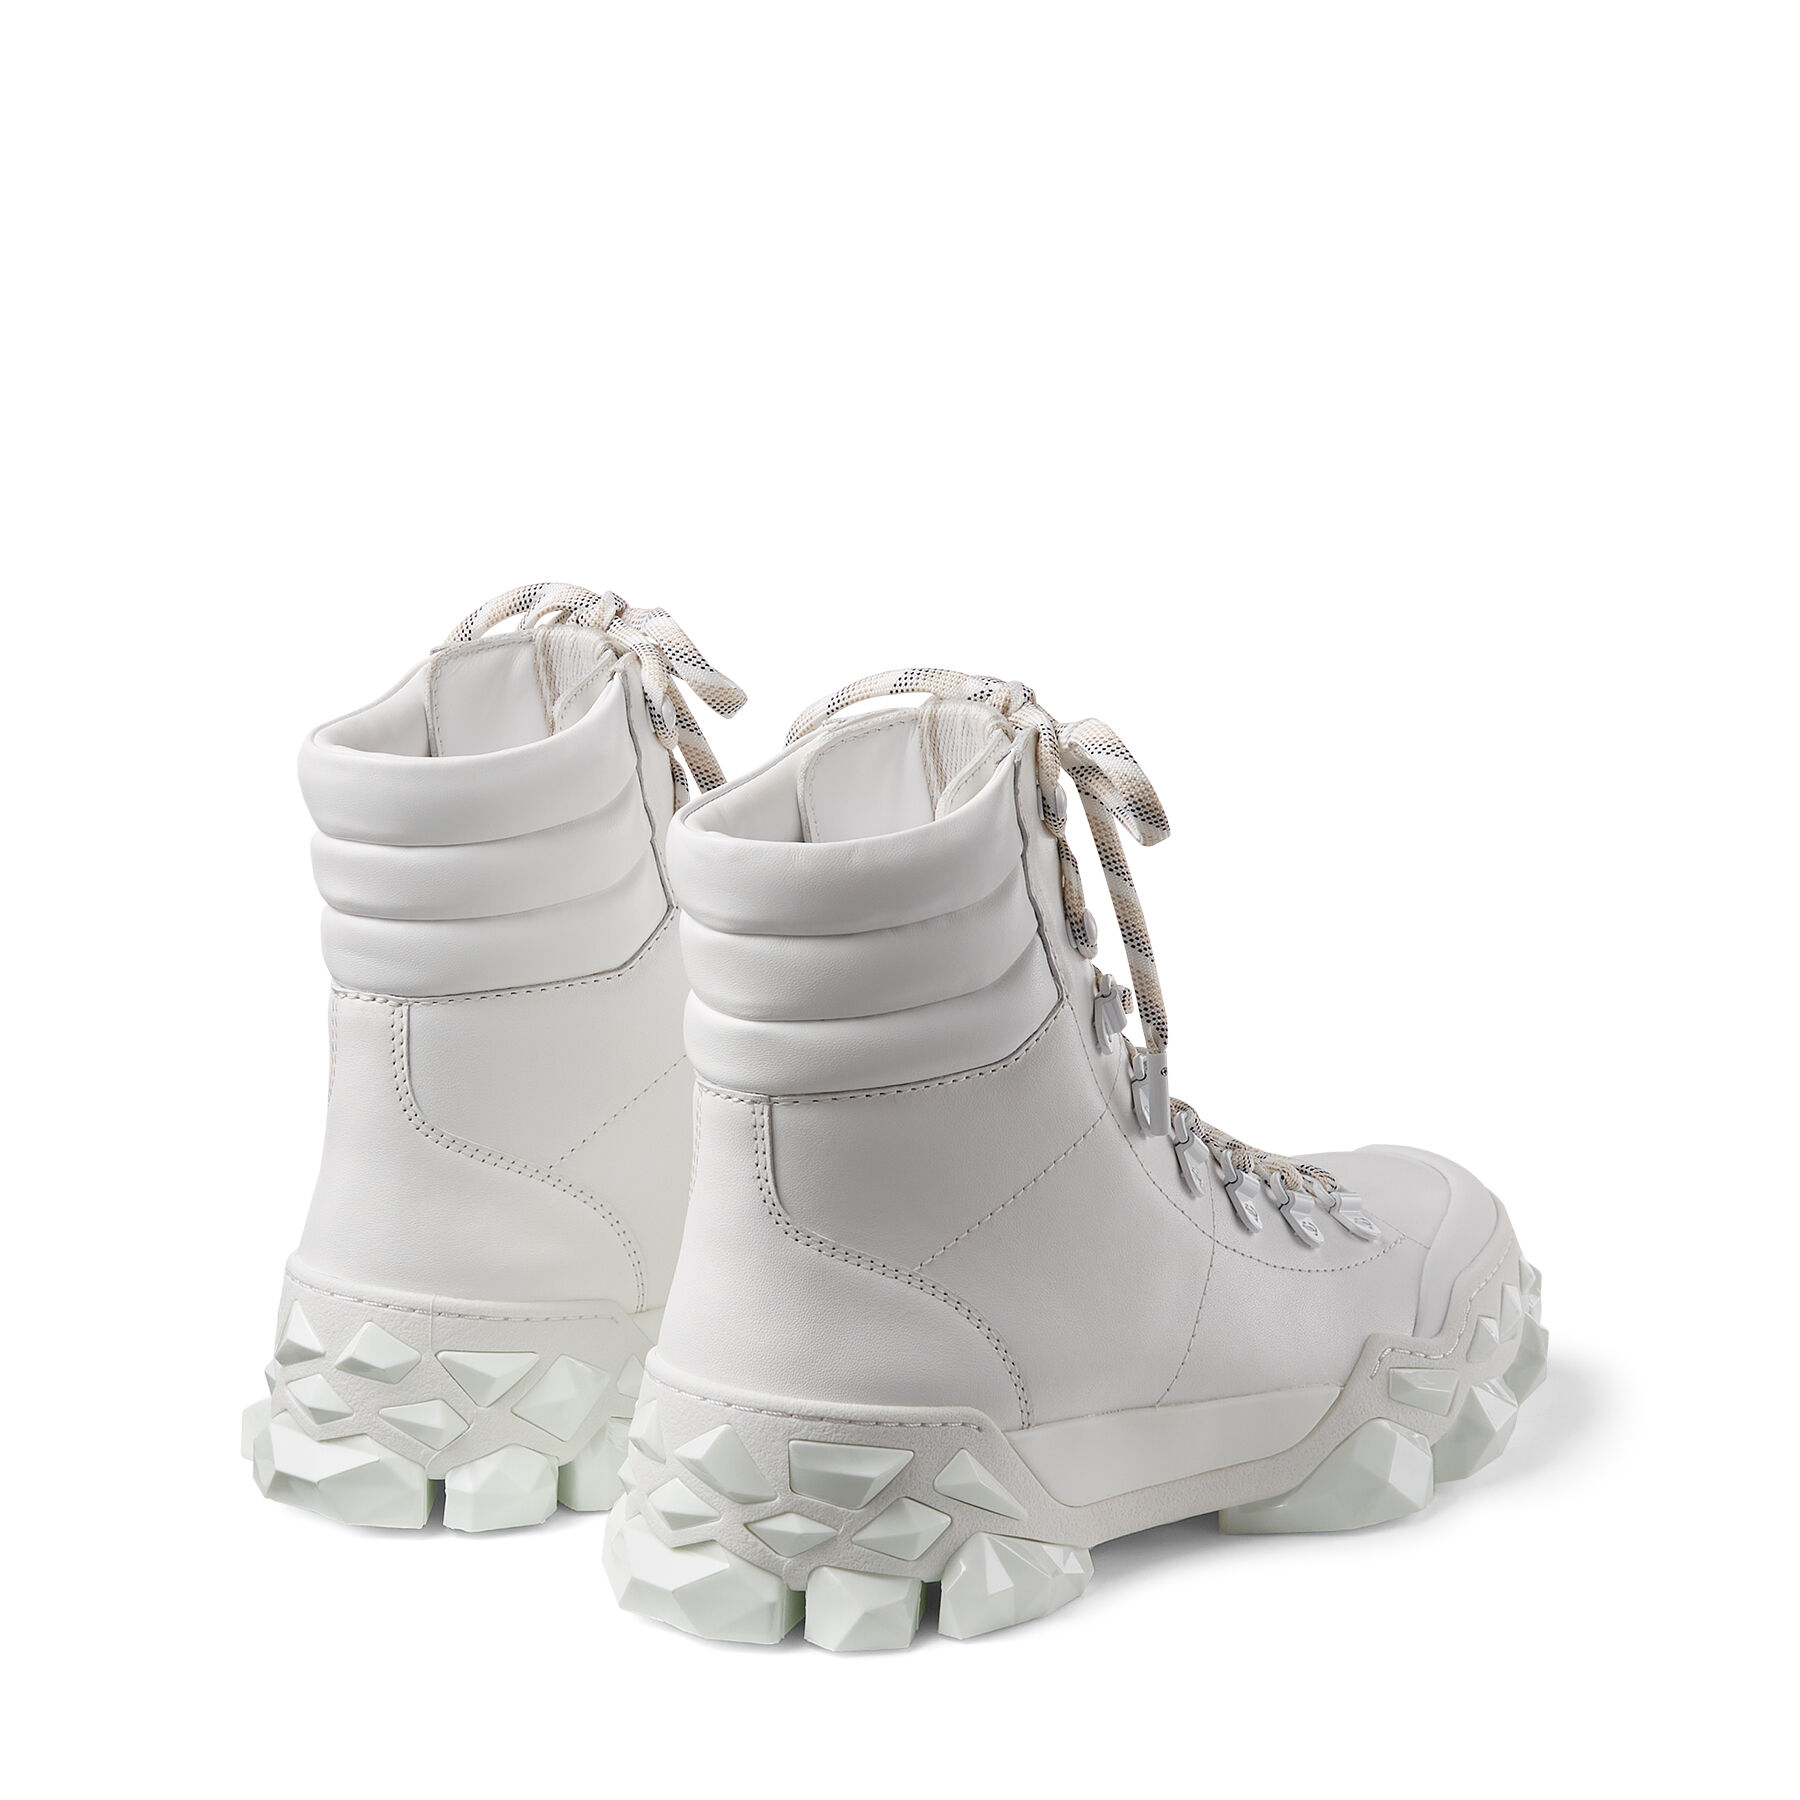 White Smooth Leather Hiking Boots with Mulitfaceted Sole | DIAMOND 